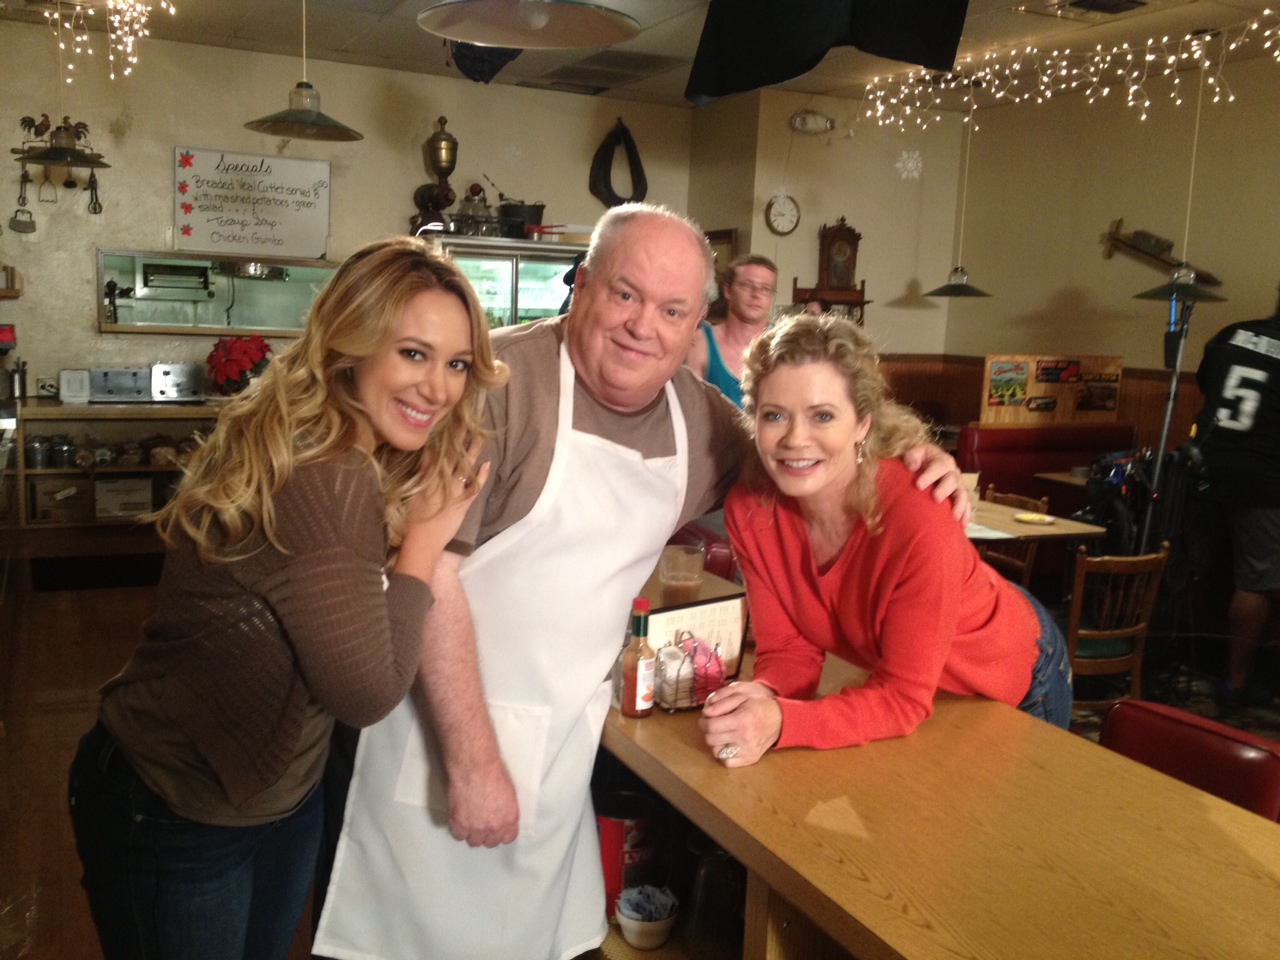 Jerry Hauck the set of 'Christmas Belle' (2013) with Haylie Duff (L) and Sheree J. Wilson (R).